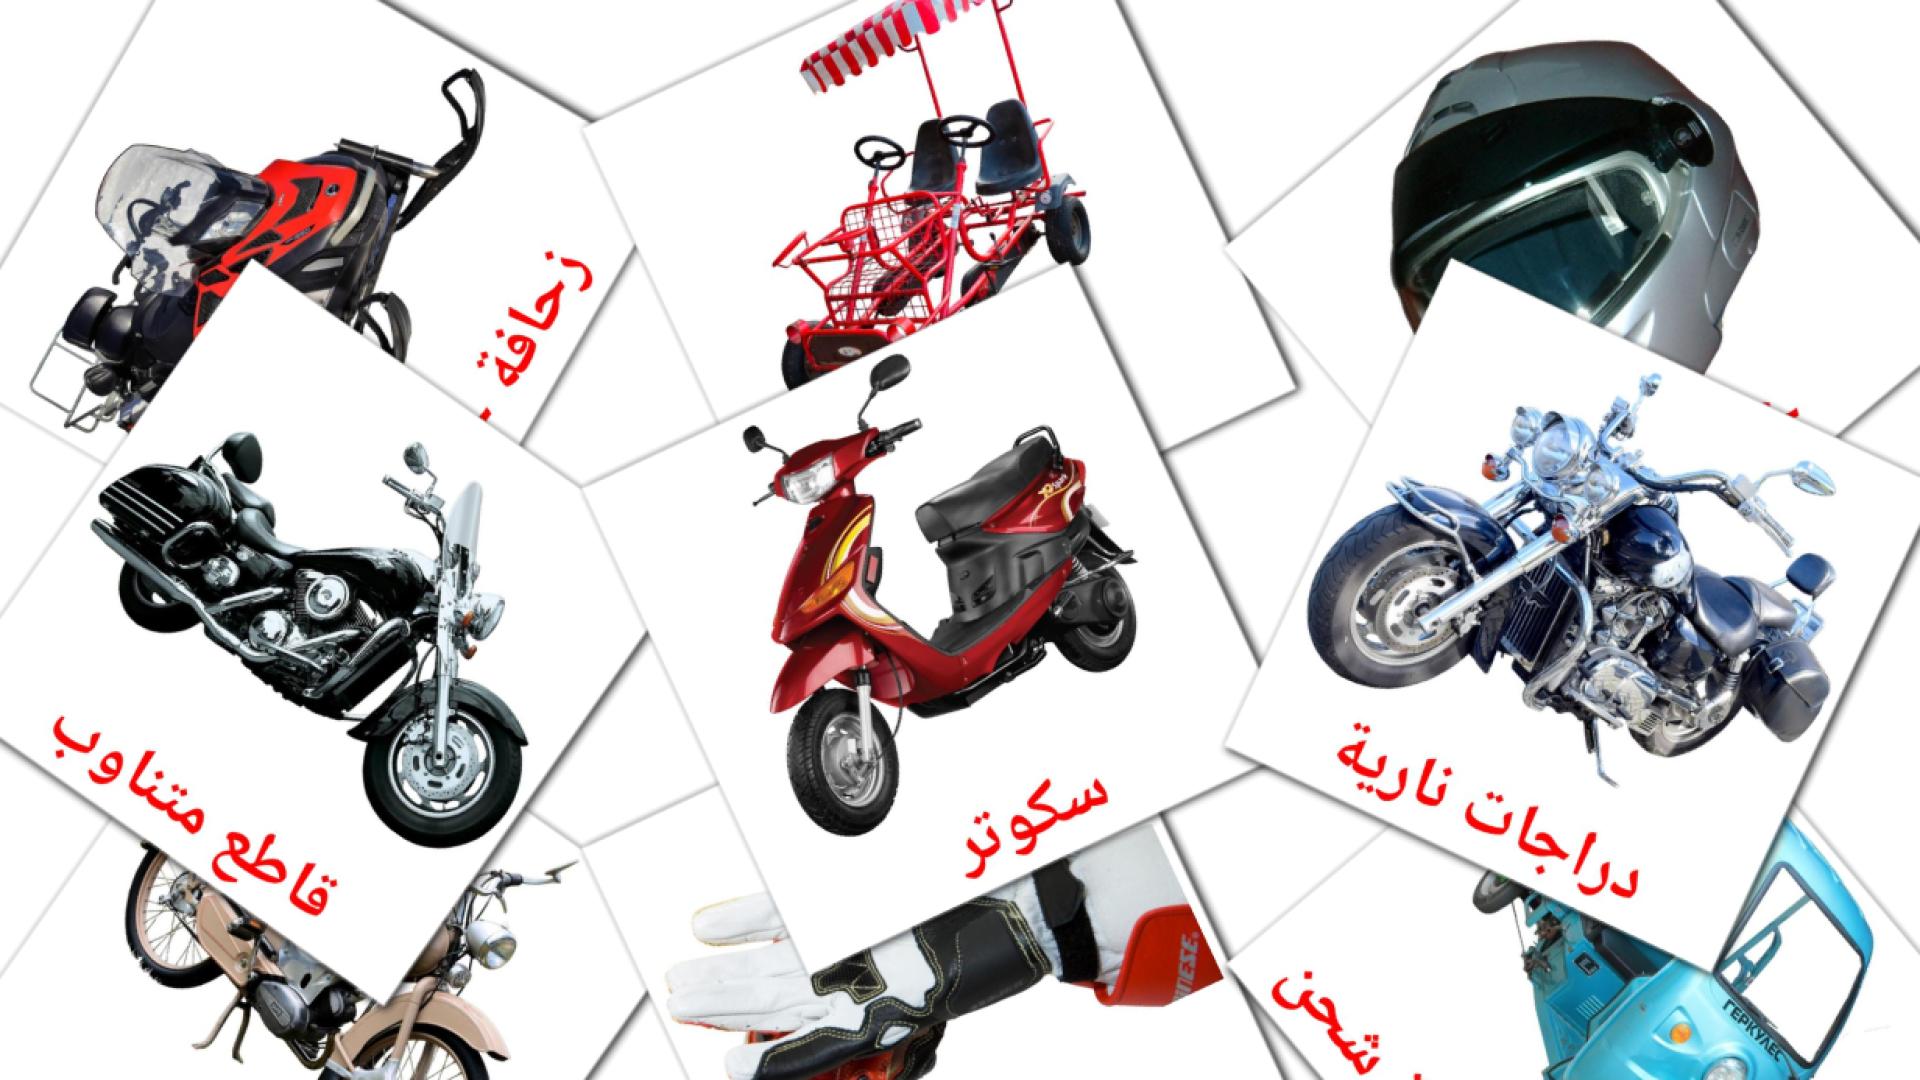 Motorcycles - arabic vocabulary cards